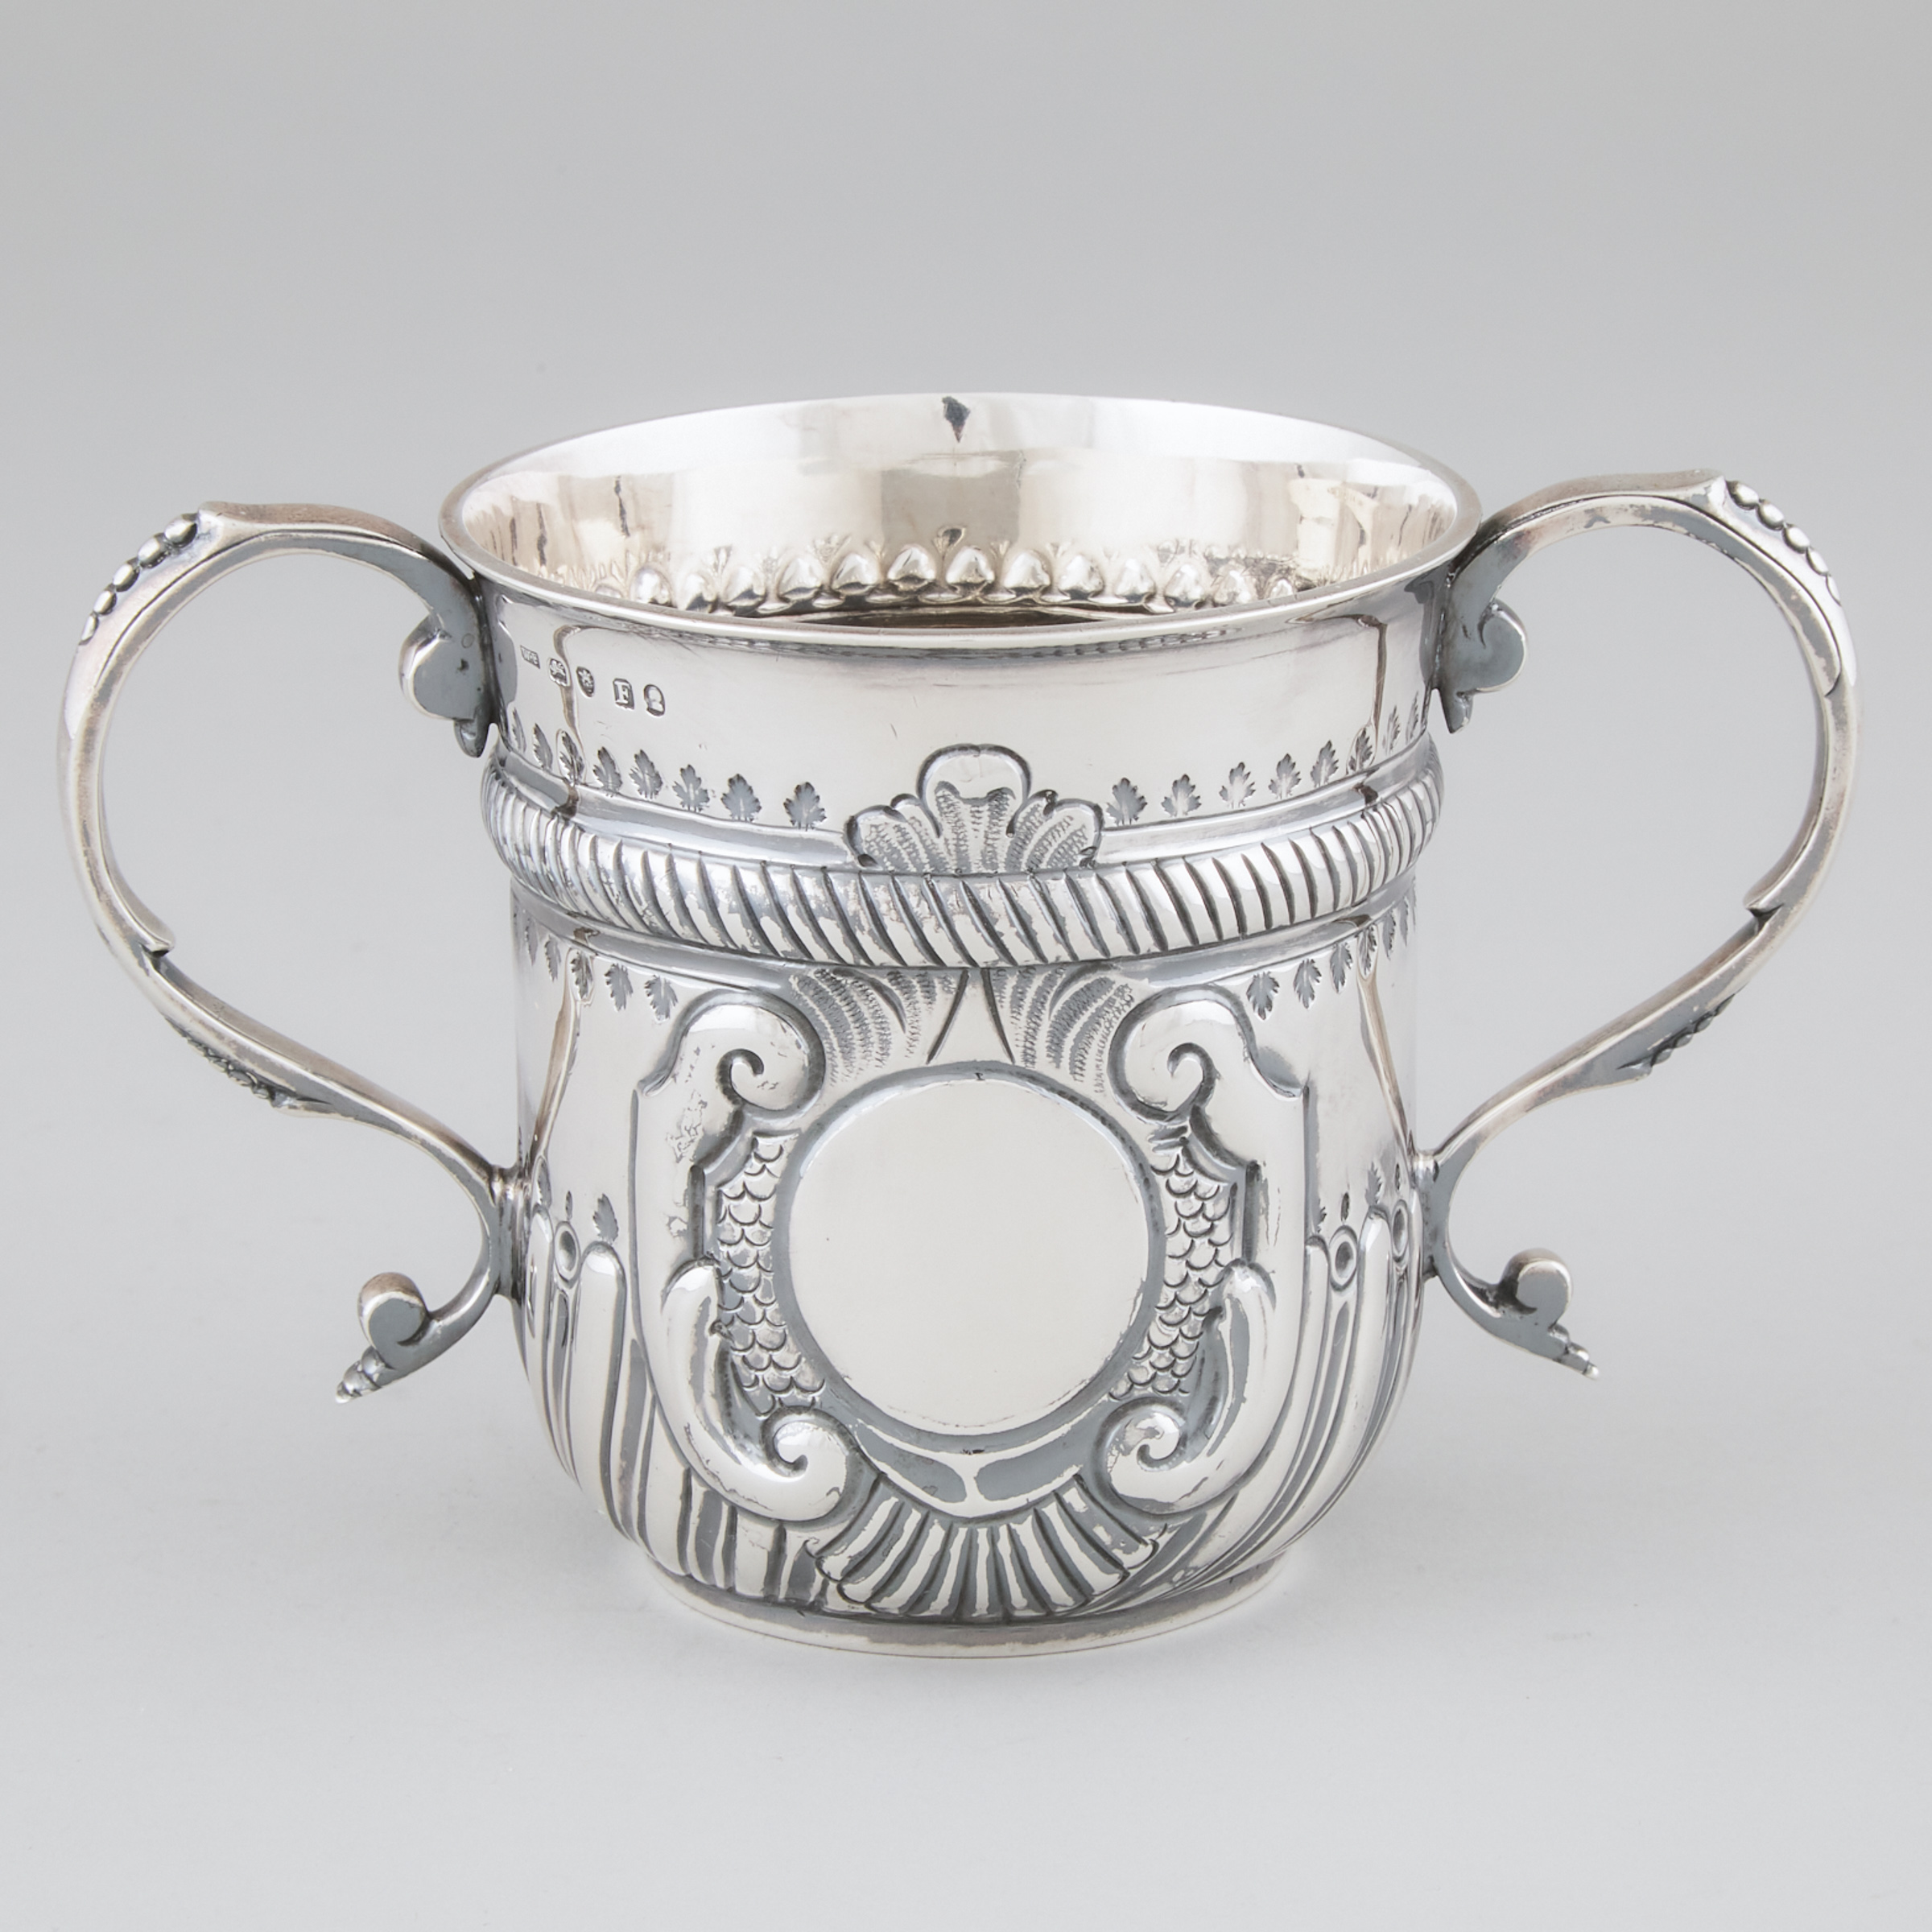 George III Silver Caudle Cup William 2f24b1